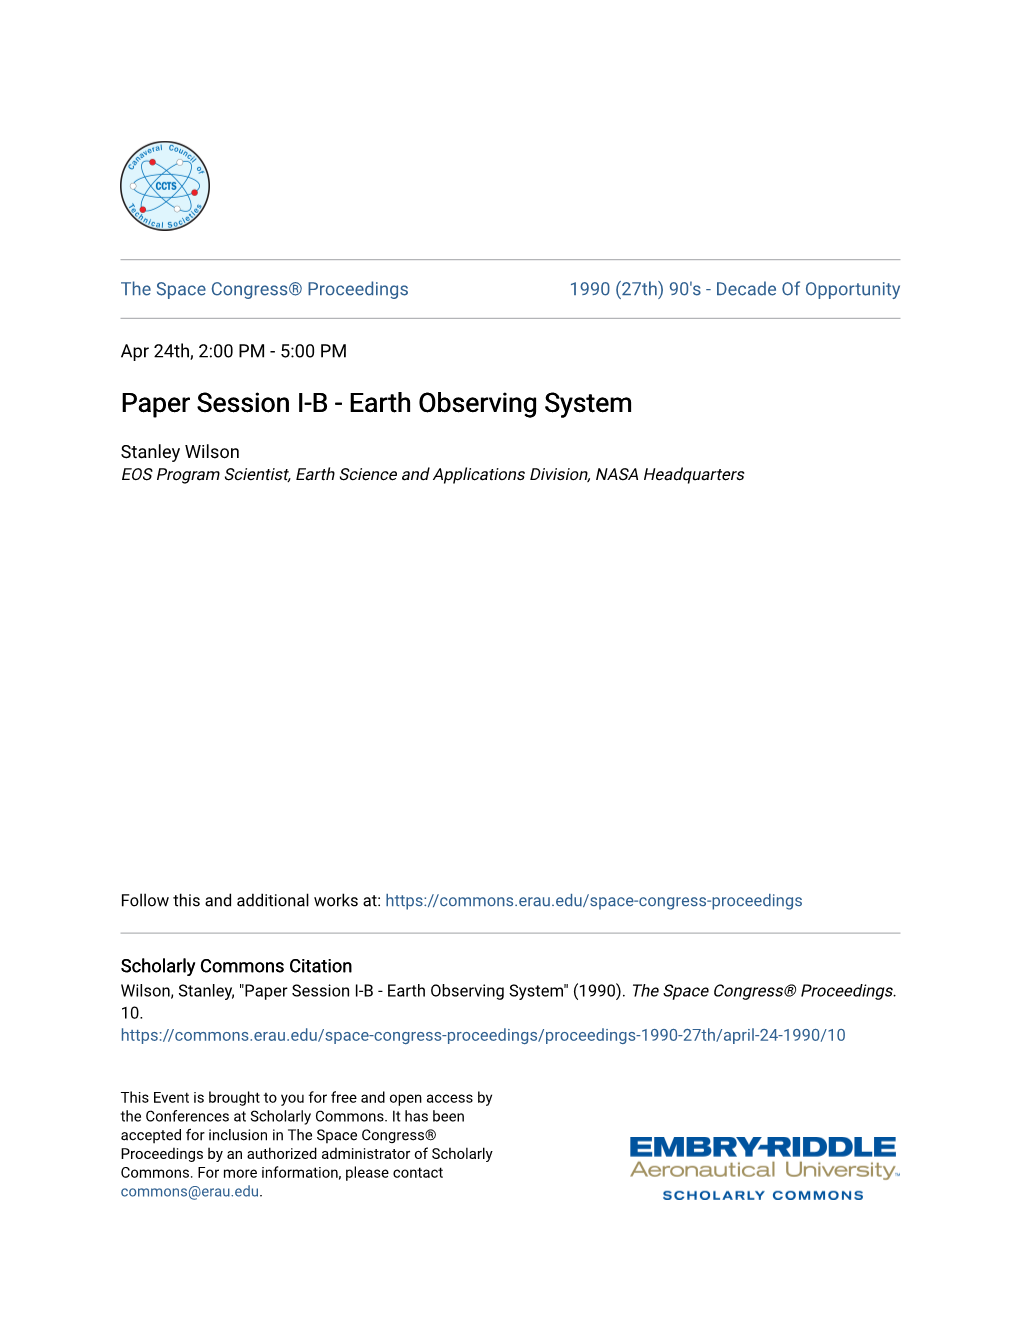 Paper Session IB-Earth Observing System